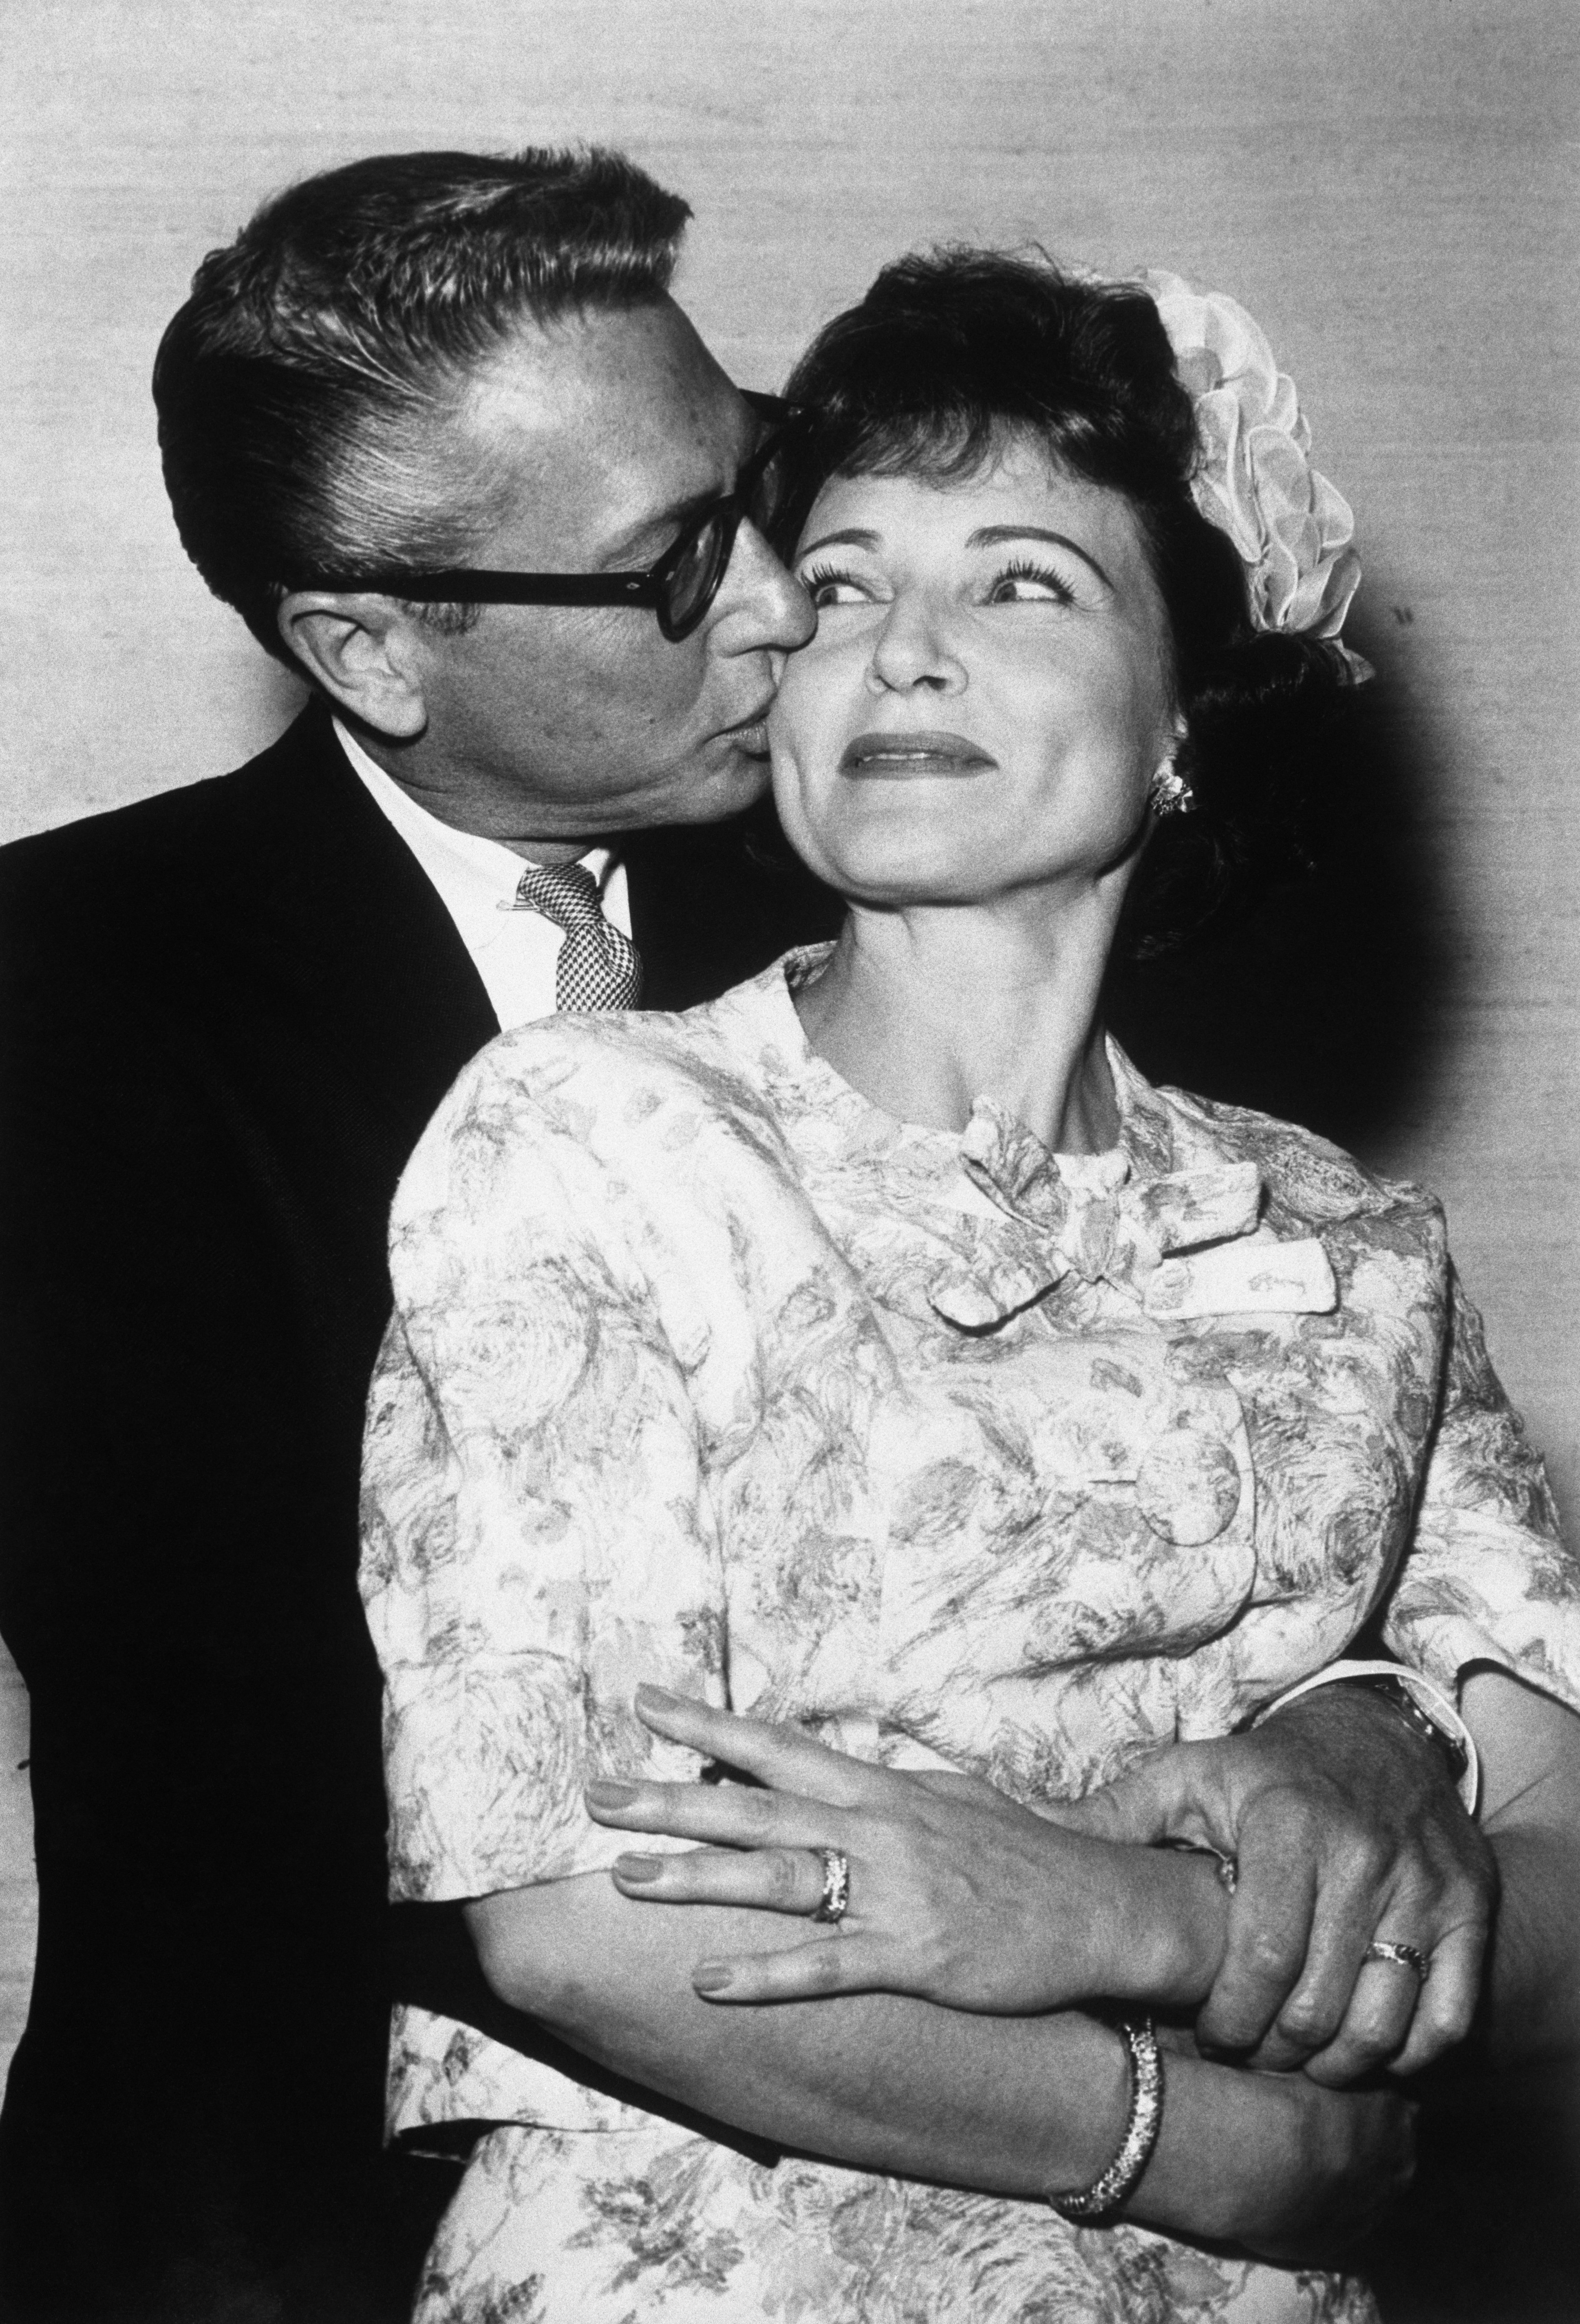 Allen Ludden and Betty White in Las Vegas in 1953 | Source: Getty Images